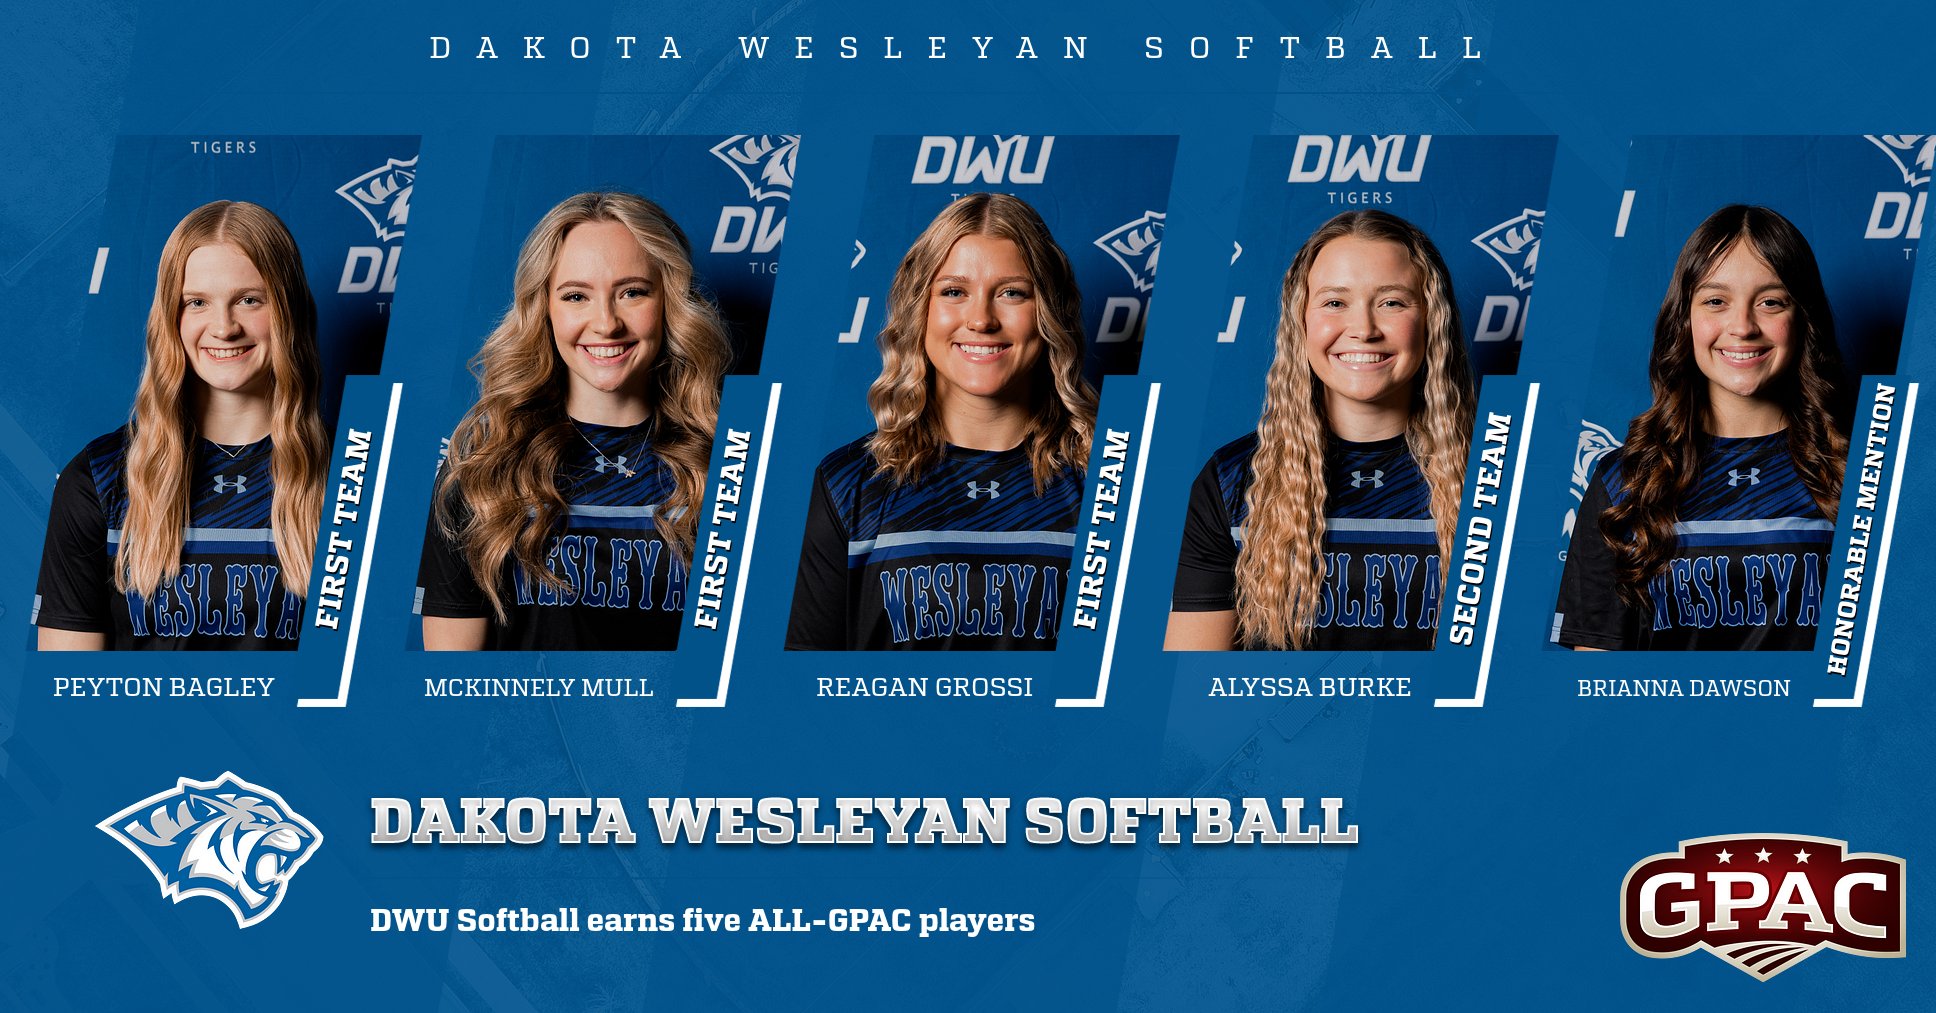 TIGER SOFTBALL EARNS FIVE ALL-GPAC PLAYERS, THREE TO FIRST TEAM